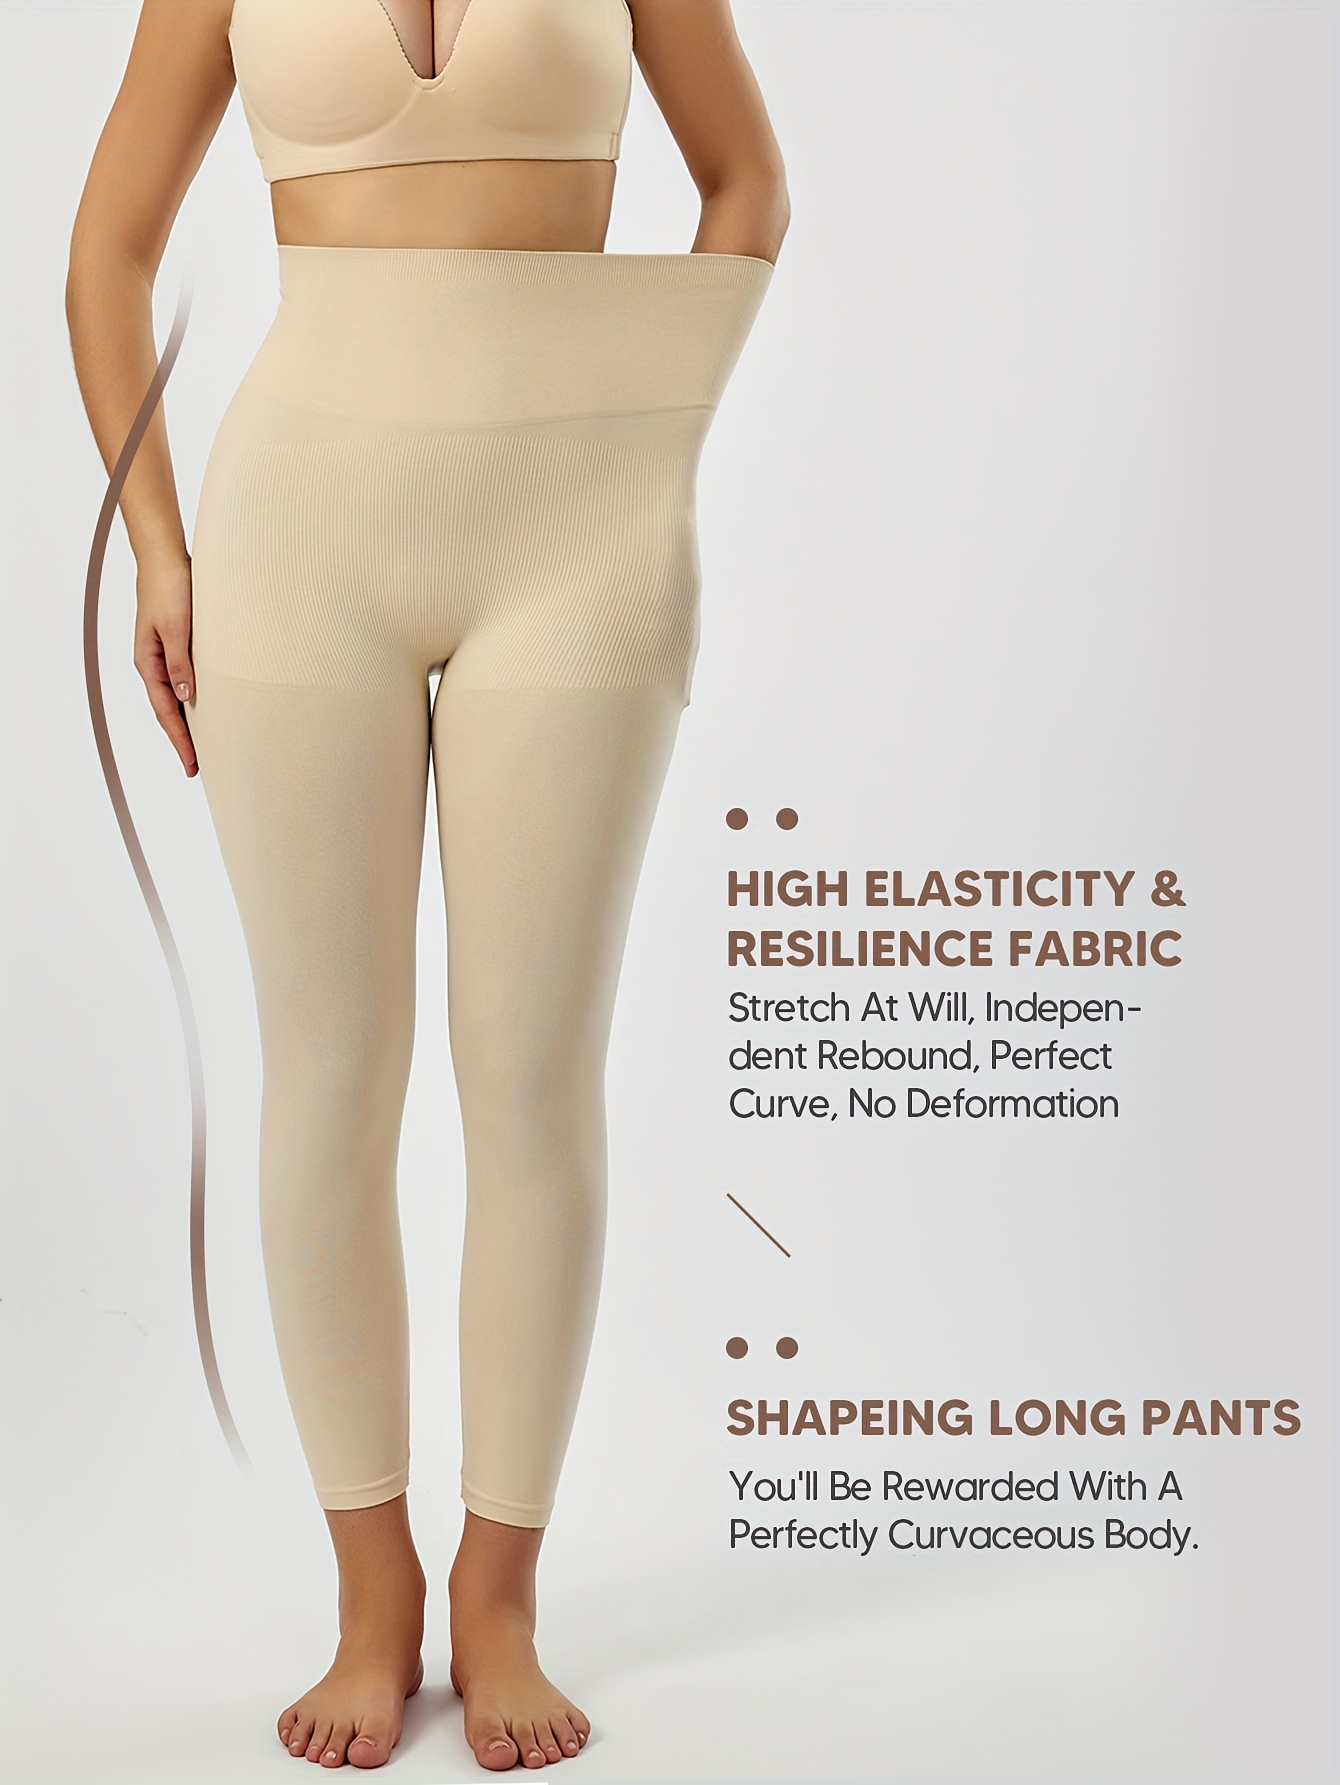 Can Shapewear Fight Cellulite?